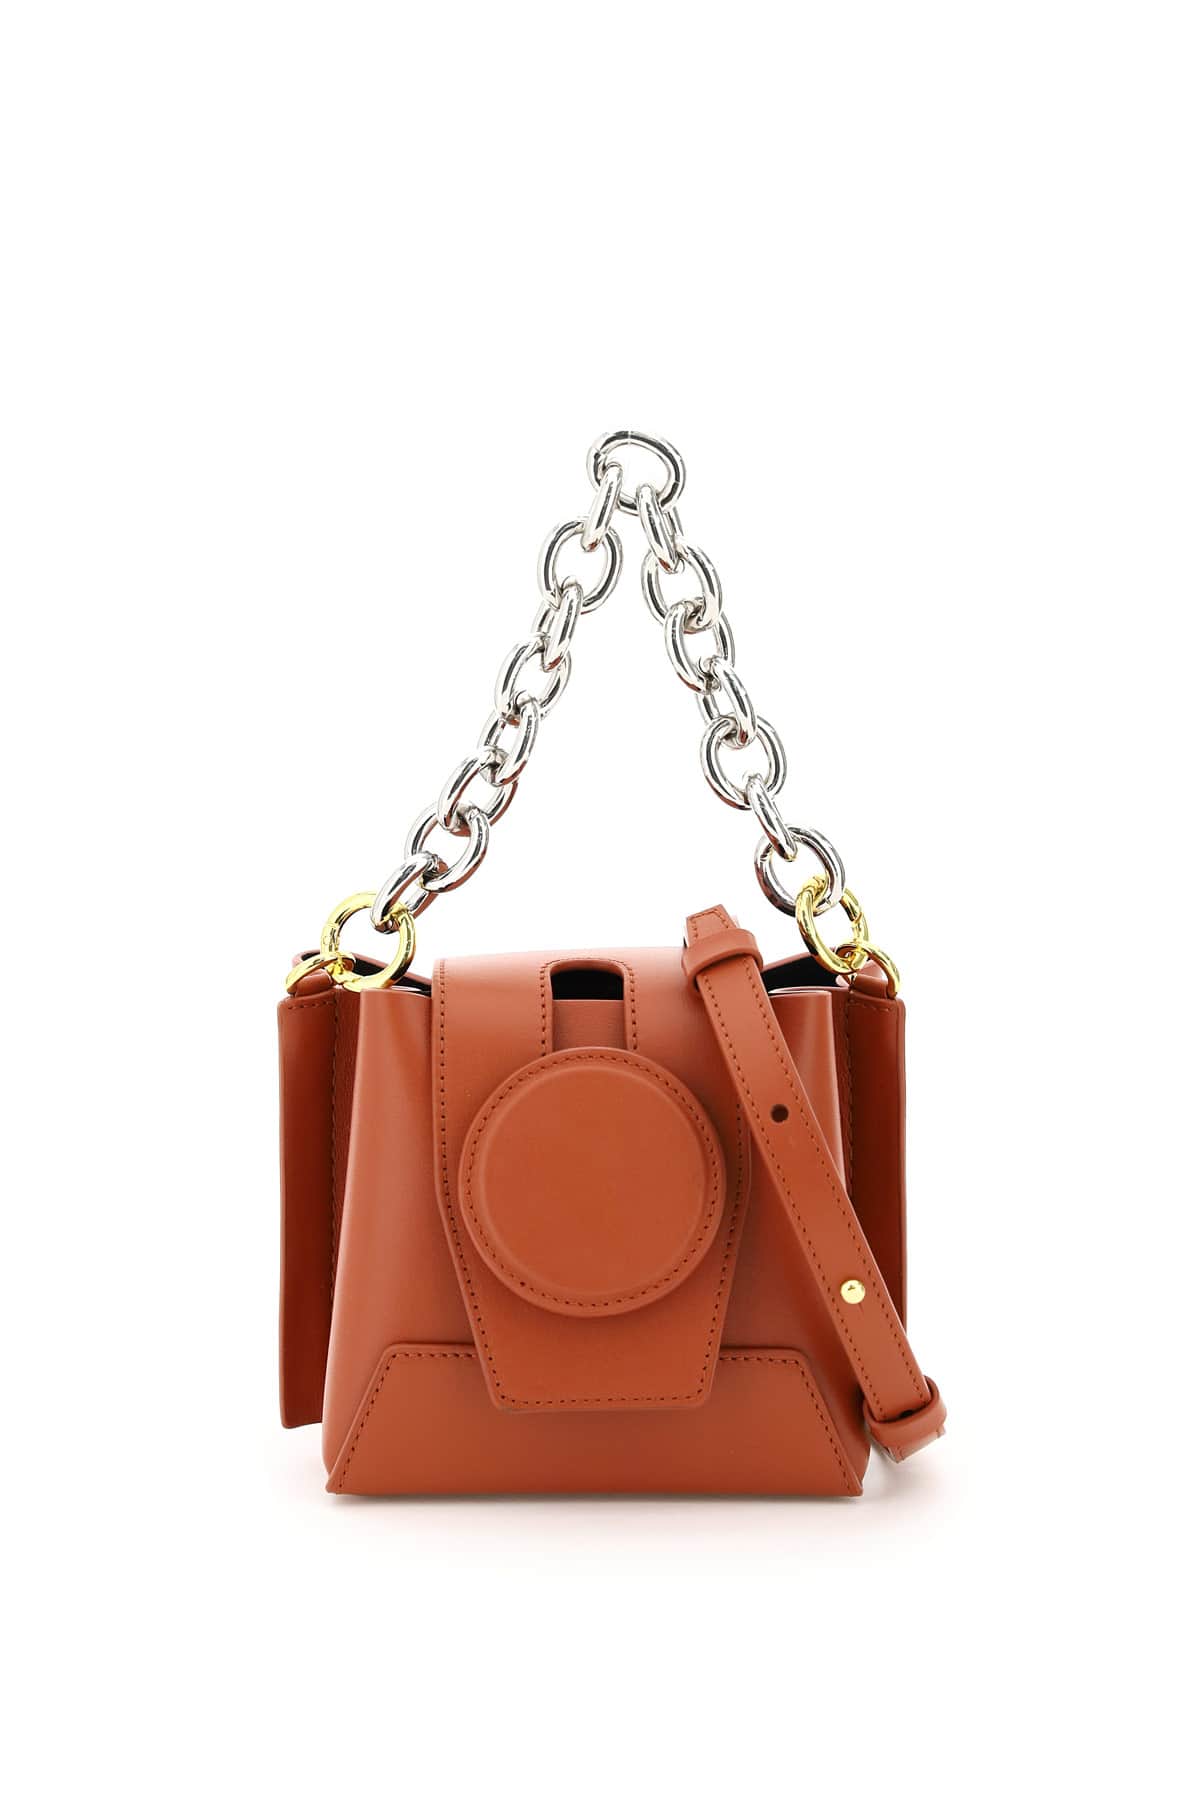 Yuzefi handmade leather bucket bag with removable chain handle. It features a removable and adjustab